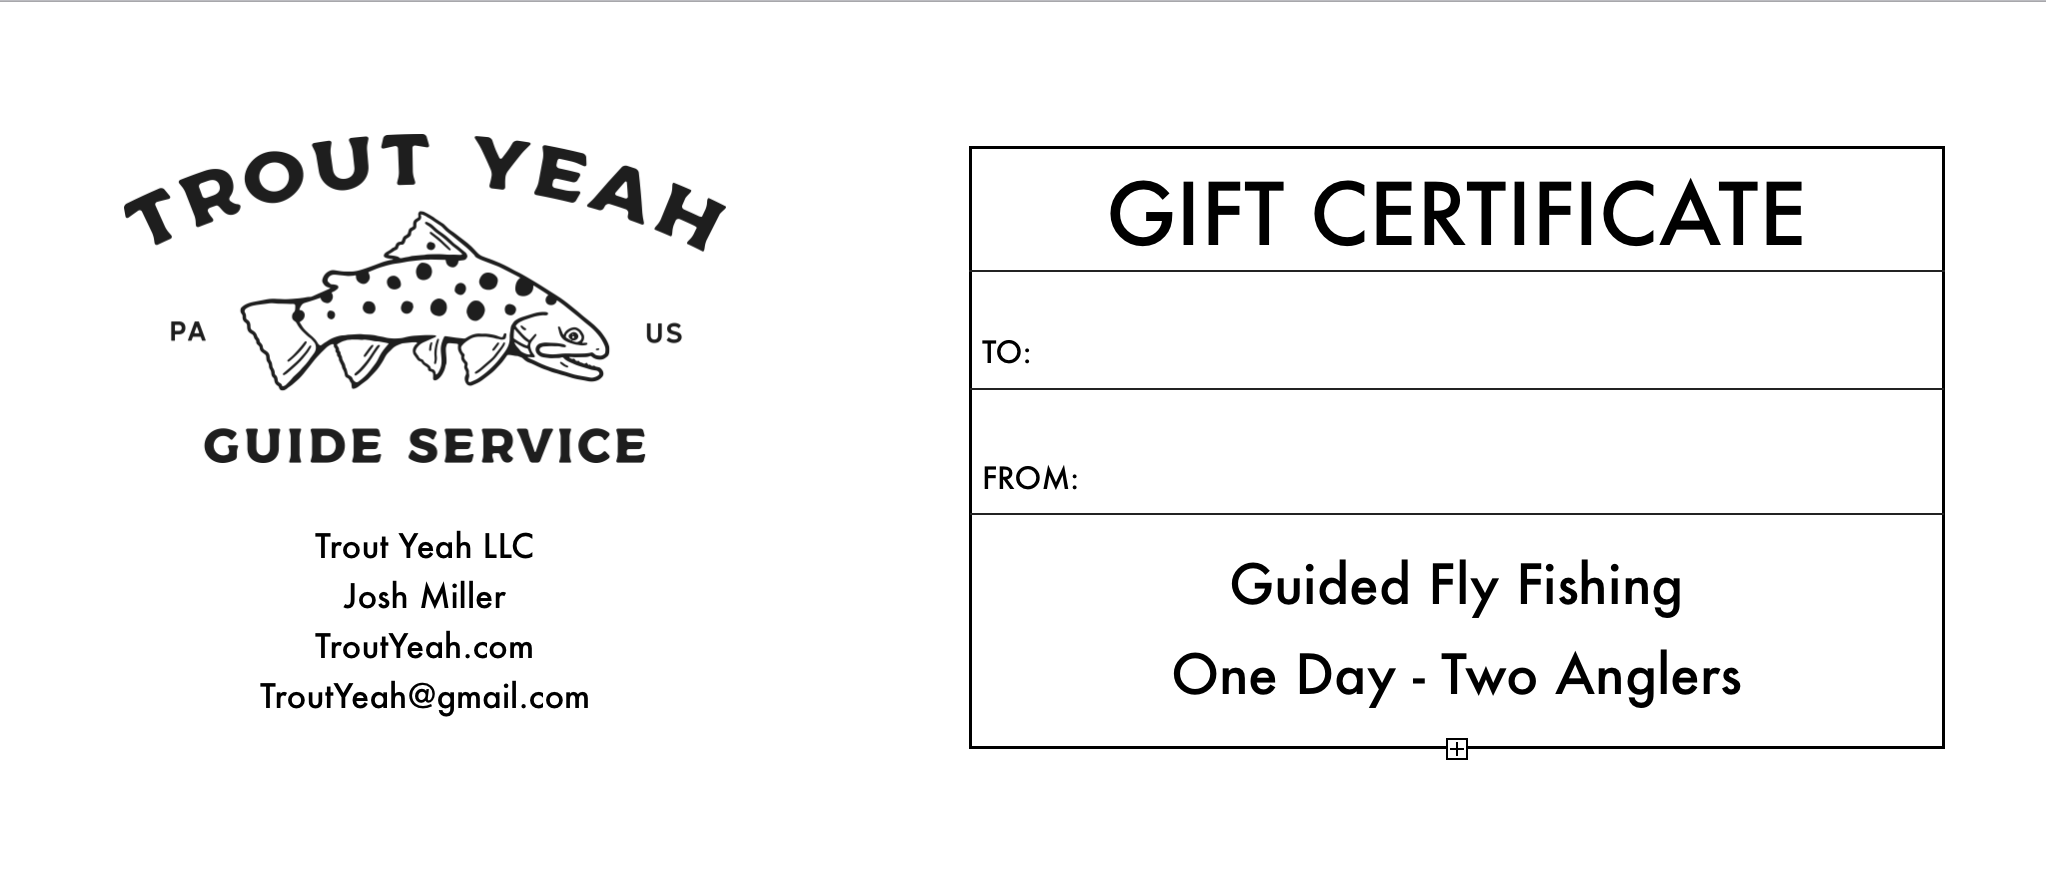 Gift Certificate — Trout Yeah, Fly Fishing Guide Service